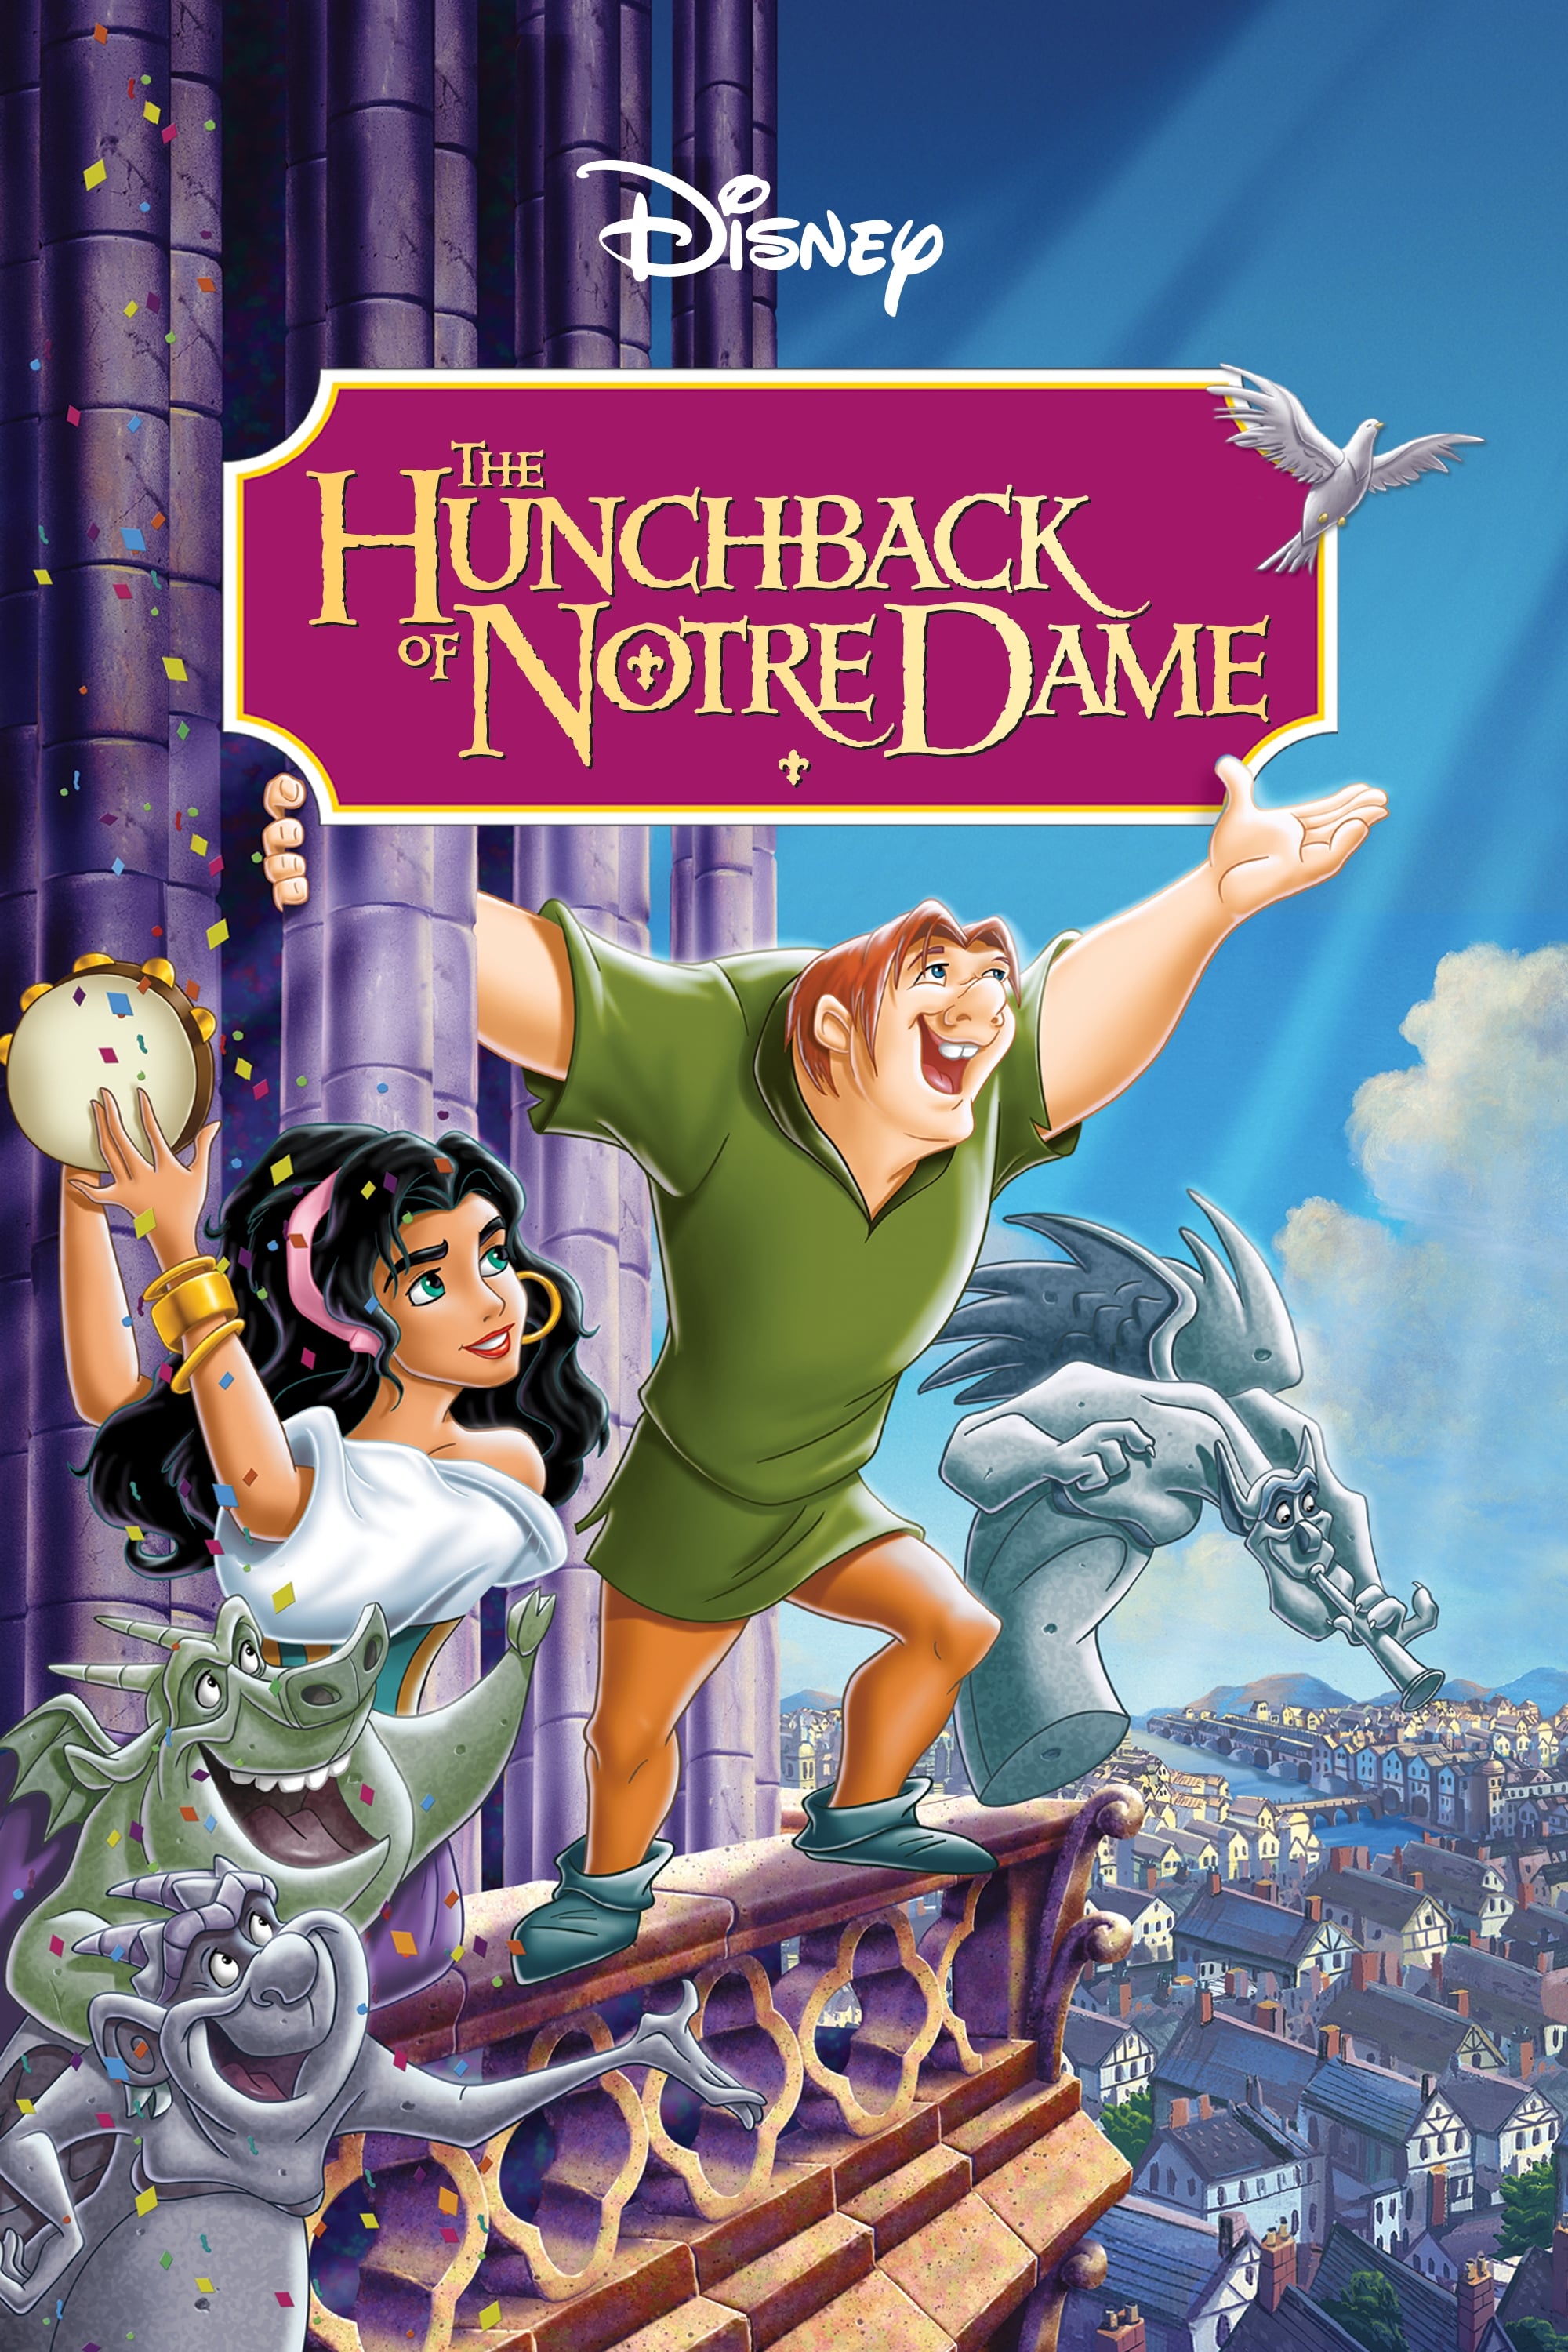 The Hunchback of Notre Dame (1996)
Best Disney Movies From The 90's